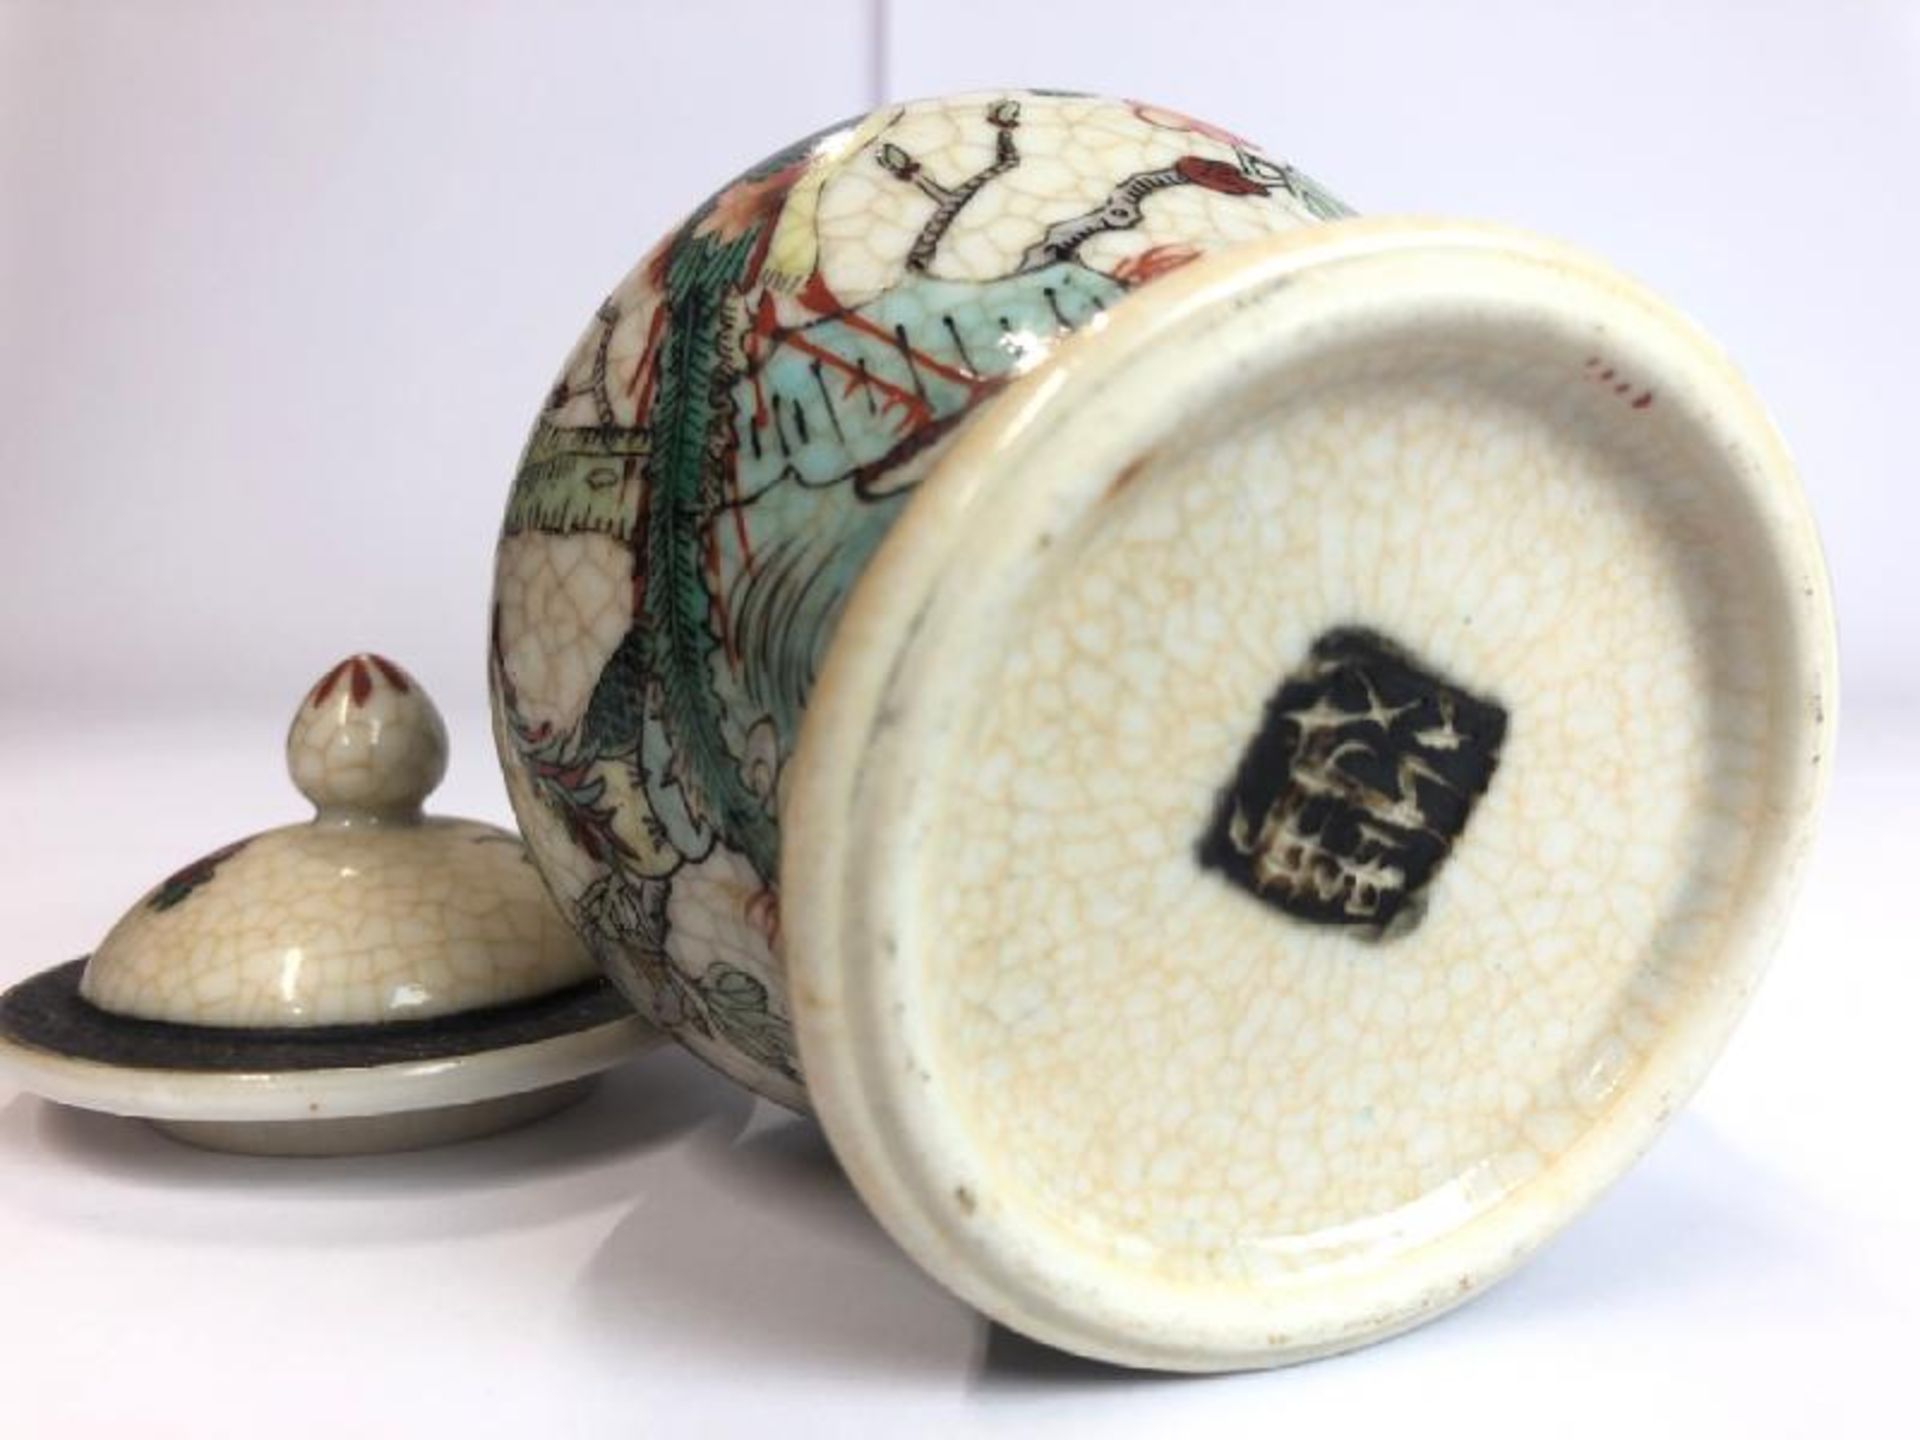 A vintage chinese crackle ware ginger jar with lid, 14cm high with a hand painted crackle ware bowl, - Image 5 of 8